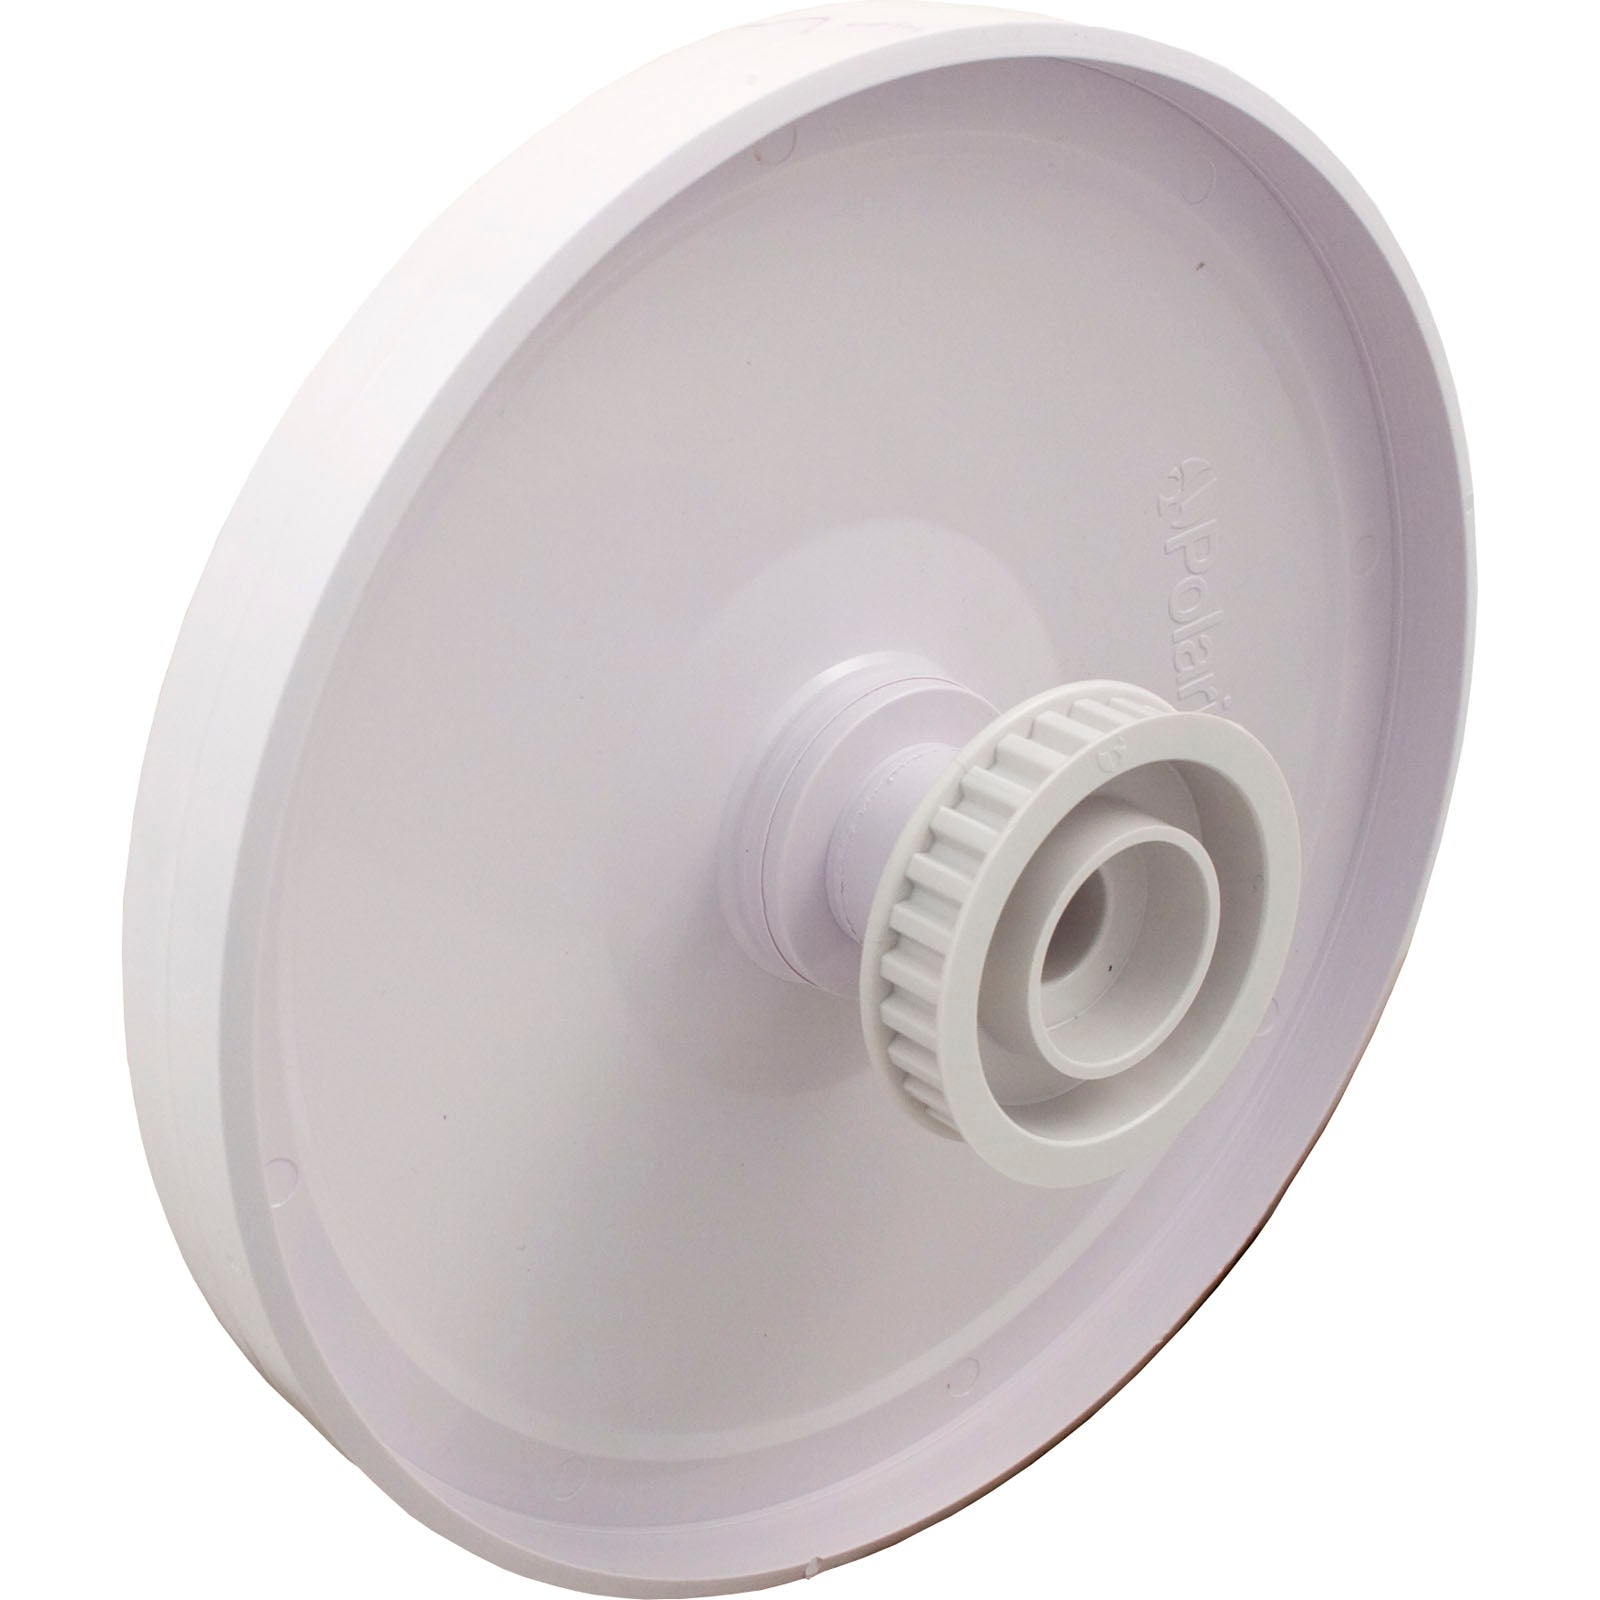 Polaris 9-100-1008 Double Side Wheel, White for Polaris 380/360 Cleaners ( No Bearings Included )